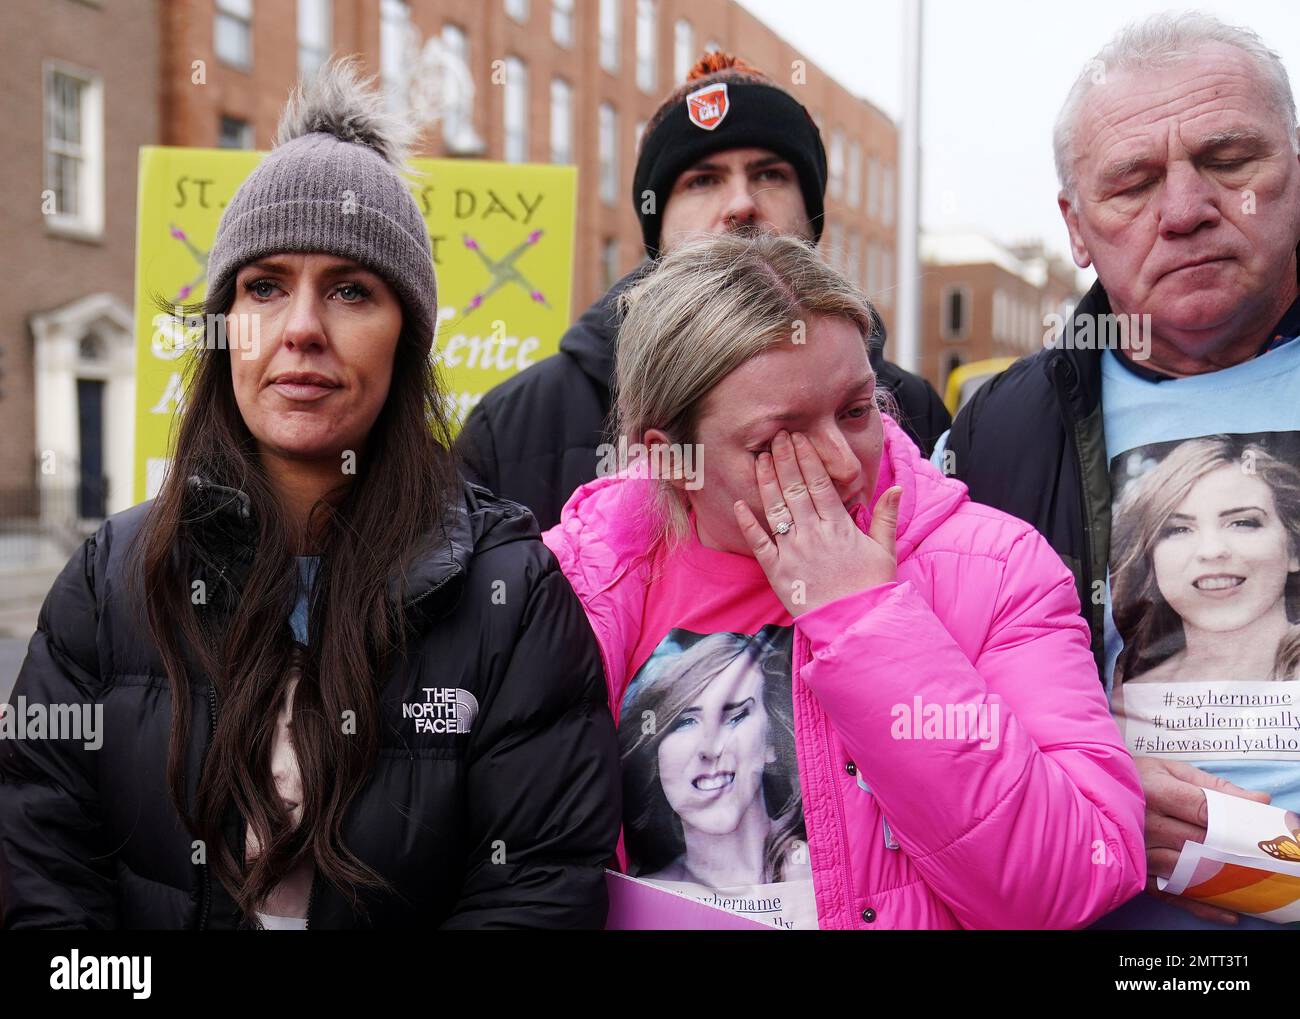 Family members of murder victim Natalie McNally Gemma Doran (left), and Hollie Donnelly (centre) attend a St Brigid's Day rally outside Leinster House, Dublin, calling on the Government to take action in addressing violence against women in Ireland. The rally was held to coincide with St Brigid’s Day, with speakers asking that women be protected in the spirit of the Celtic goddess and Christian saint Brigid, who is associated with healing. Picture date: Wednesday February 1, 2023. Stock Photo